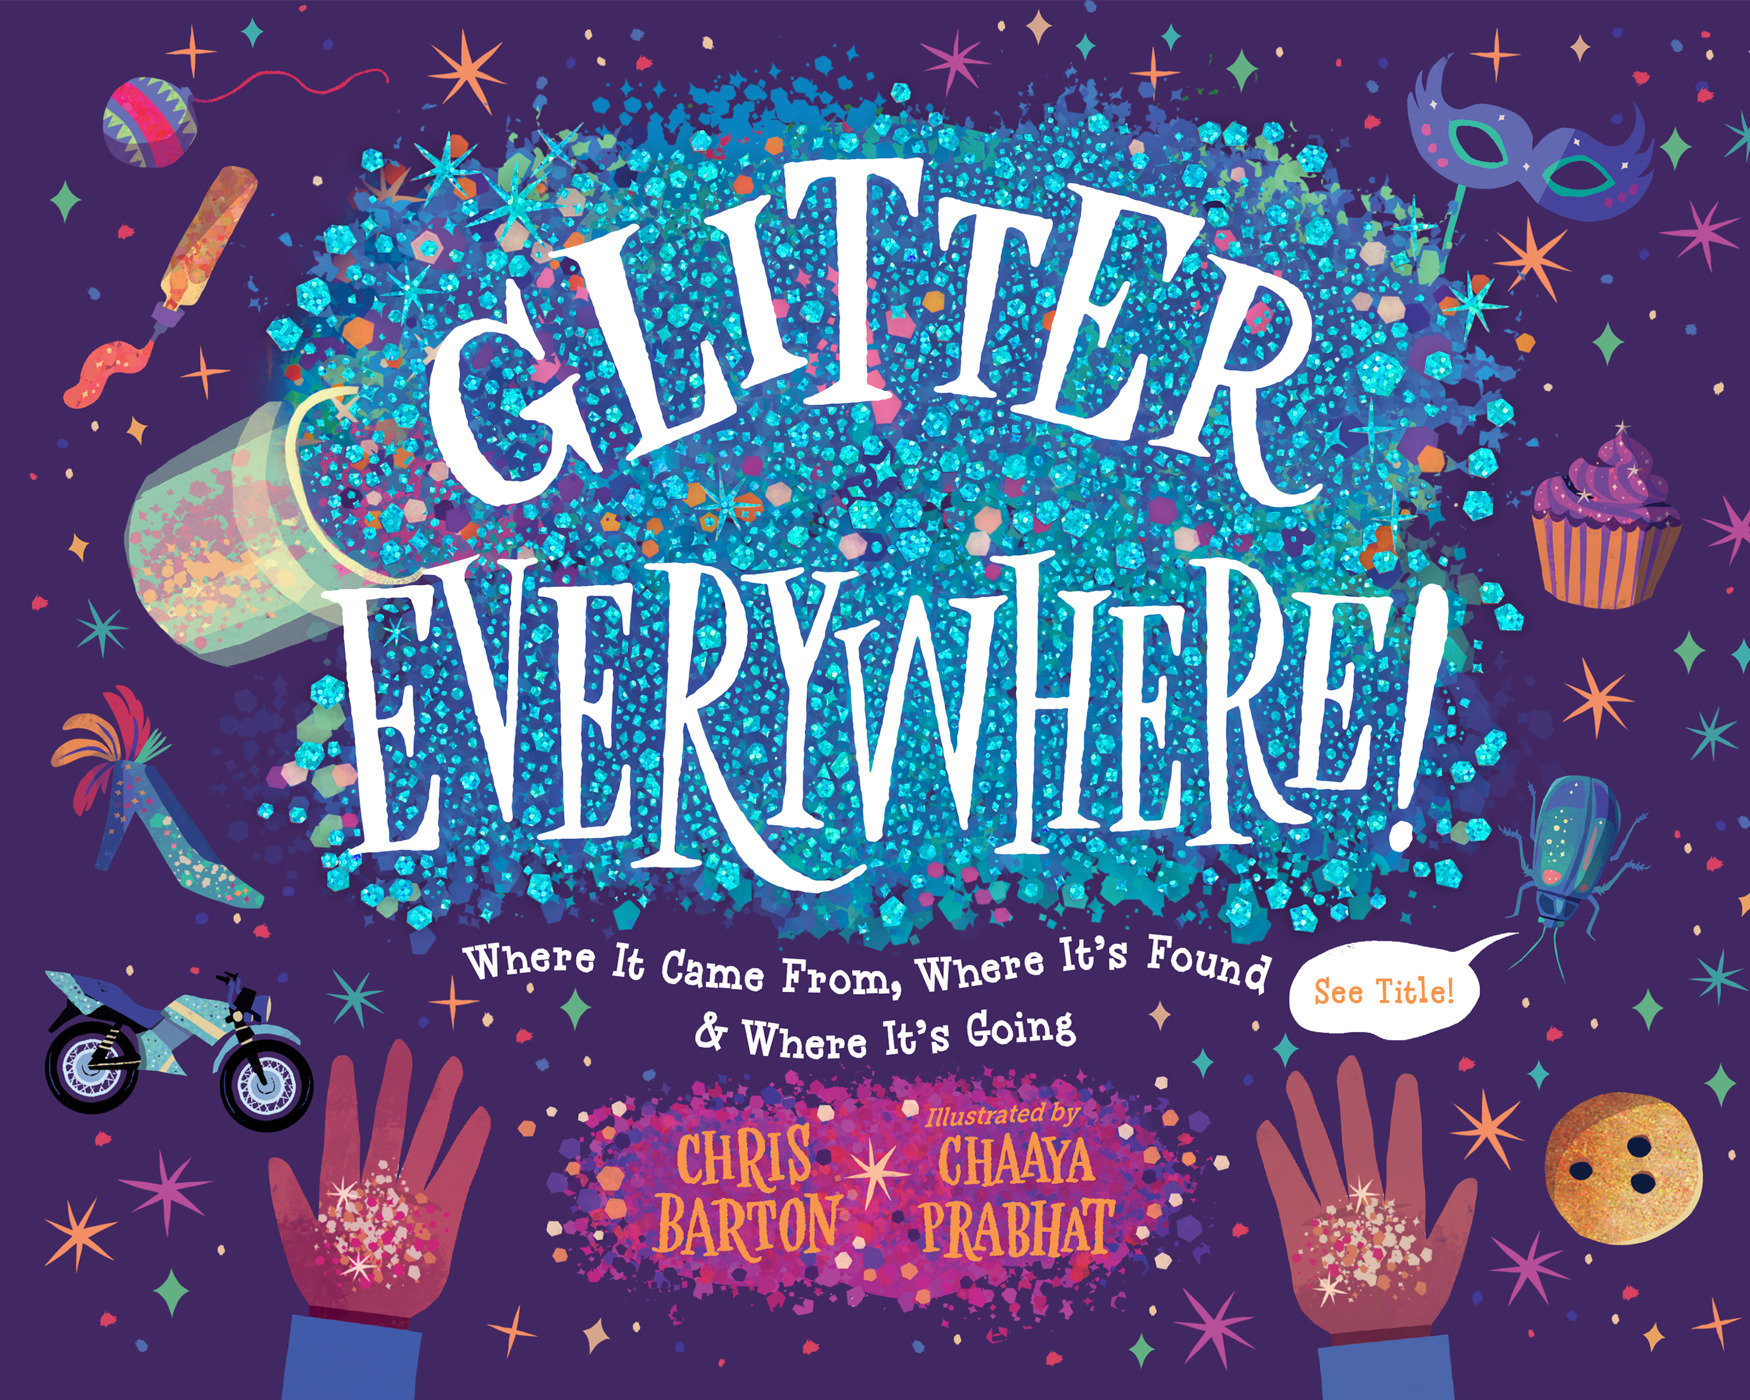 Glitter Everywhere! Where It Came From, Where It's Found & Where It's Going cover image